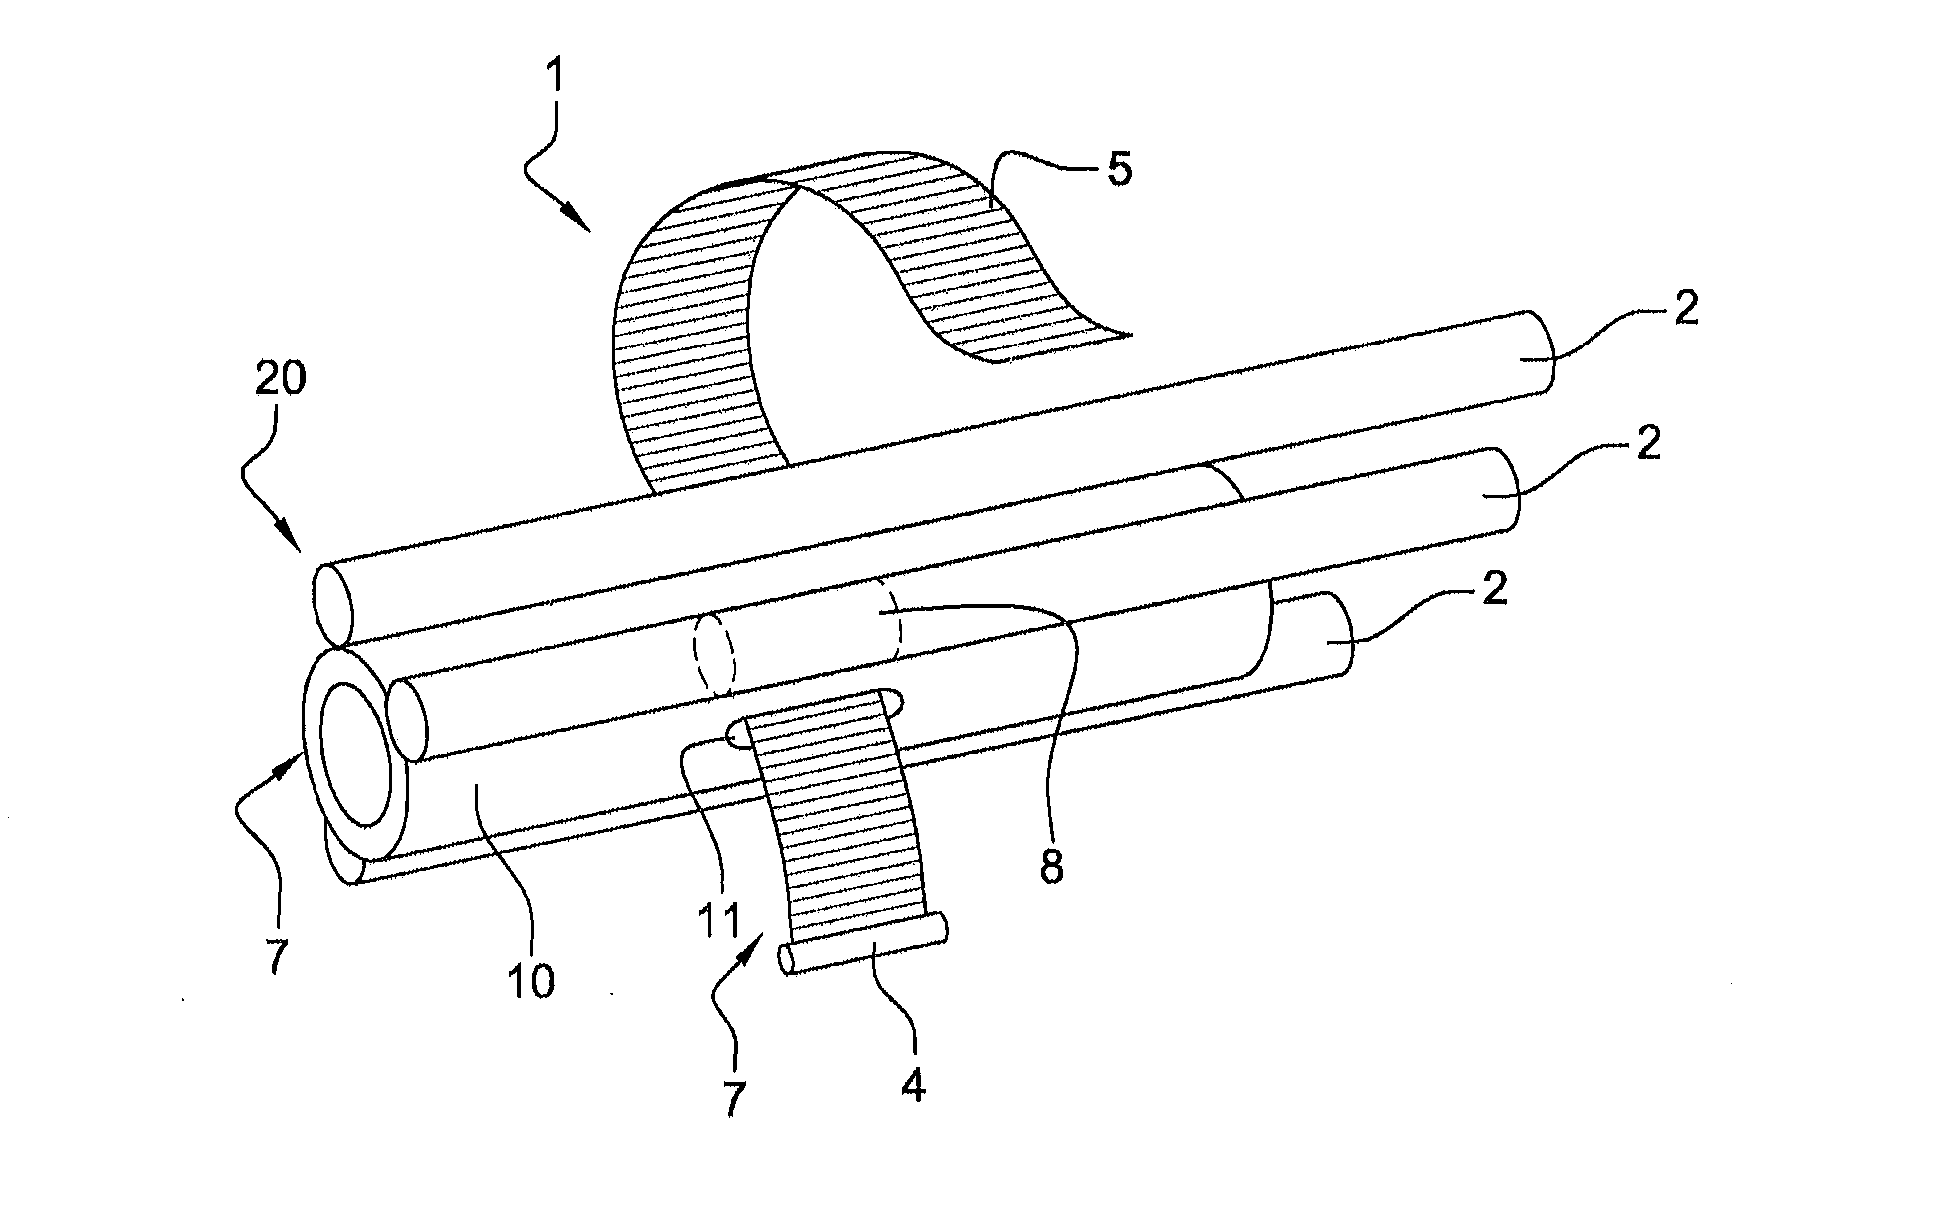 Device for securing and retaining at least one electrical harness in a turbomachine